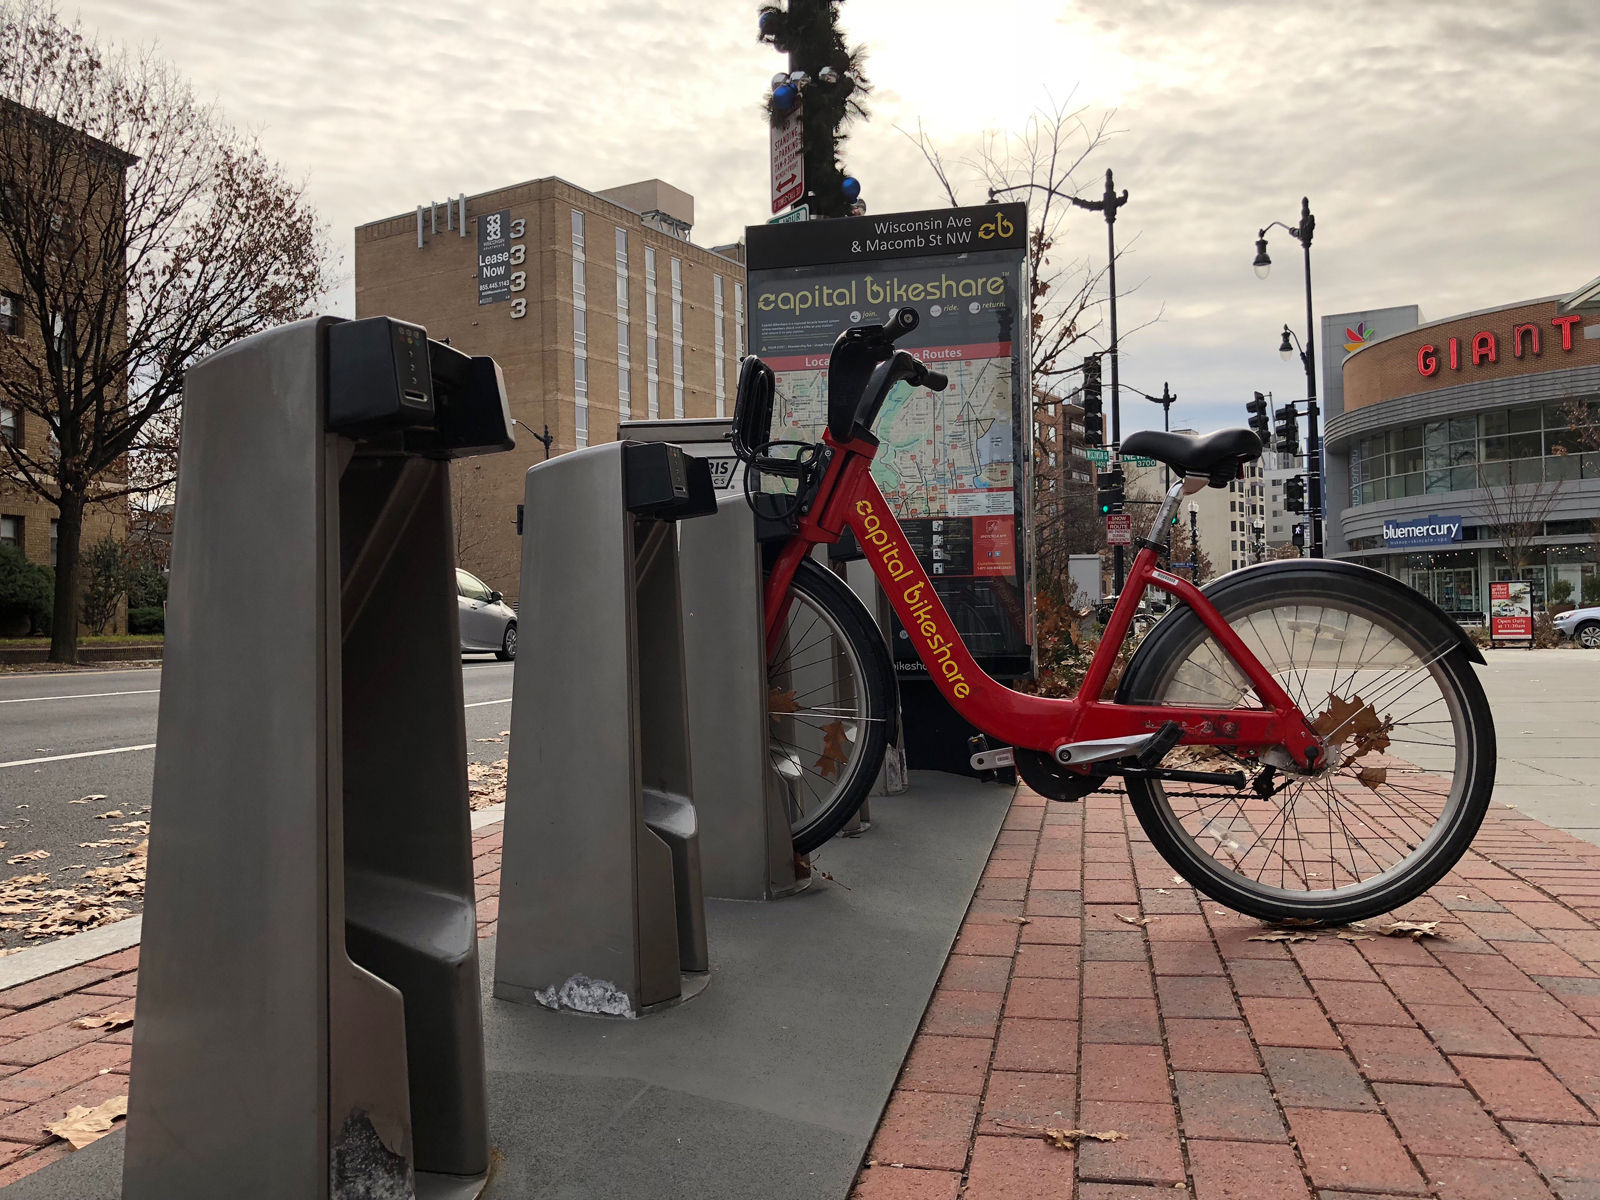 Capital Bikeshare bikes have to be rented and returned to docking station, but dockless bikes, as their name suggests, can be picked up anywhere. DDOT said that in October Capital Bikeshare logged 338,152 total trips compared to 56,477 trips on dockless bikes. (WTOP/Kate Ryan)